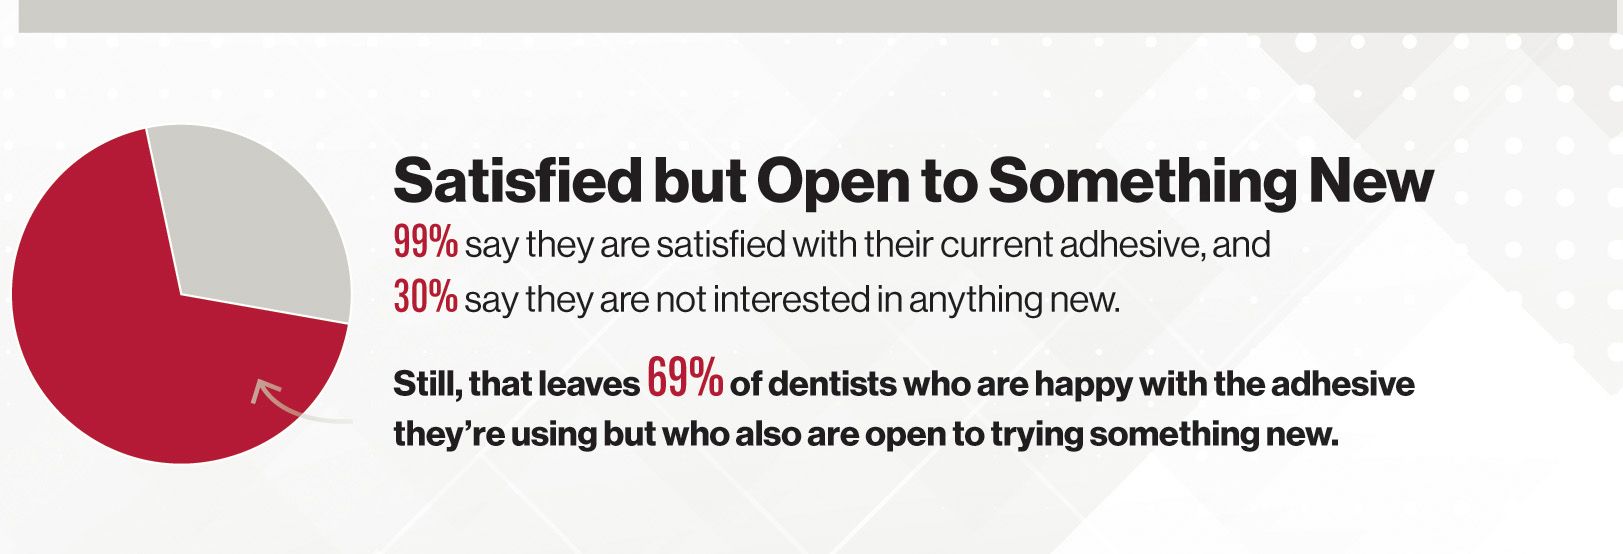 Satisfied but Open to Something New 99% say they are satisfied with their current adhesive, and 30% say they are not interested in anything new. Still, that leaves 69% of dentists who are happy with the adhesive they’re using but who also are open to trying something new.